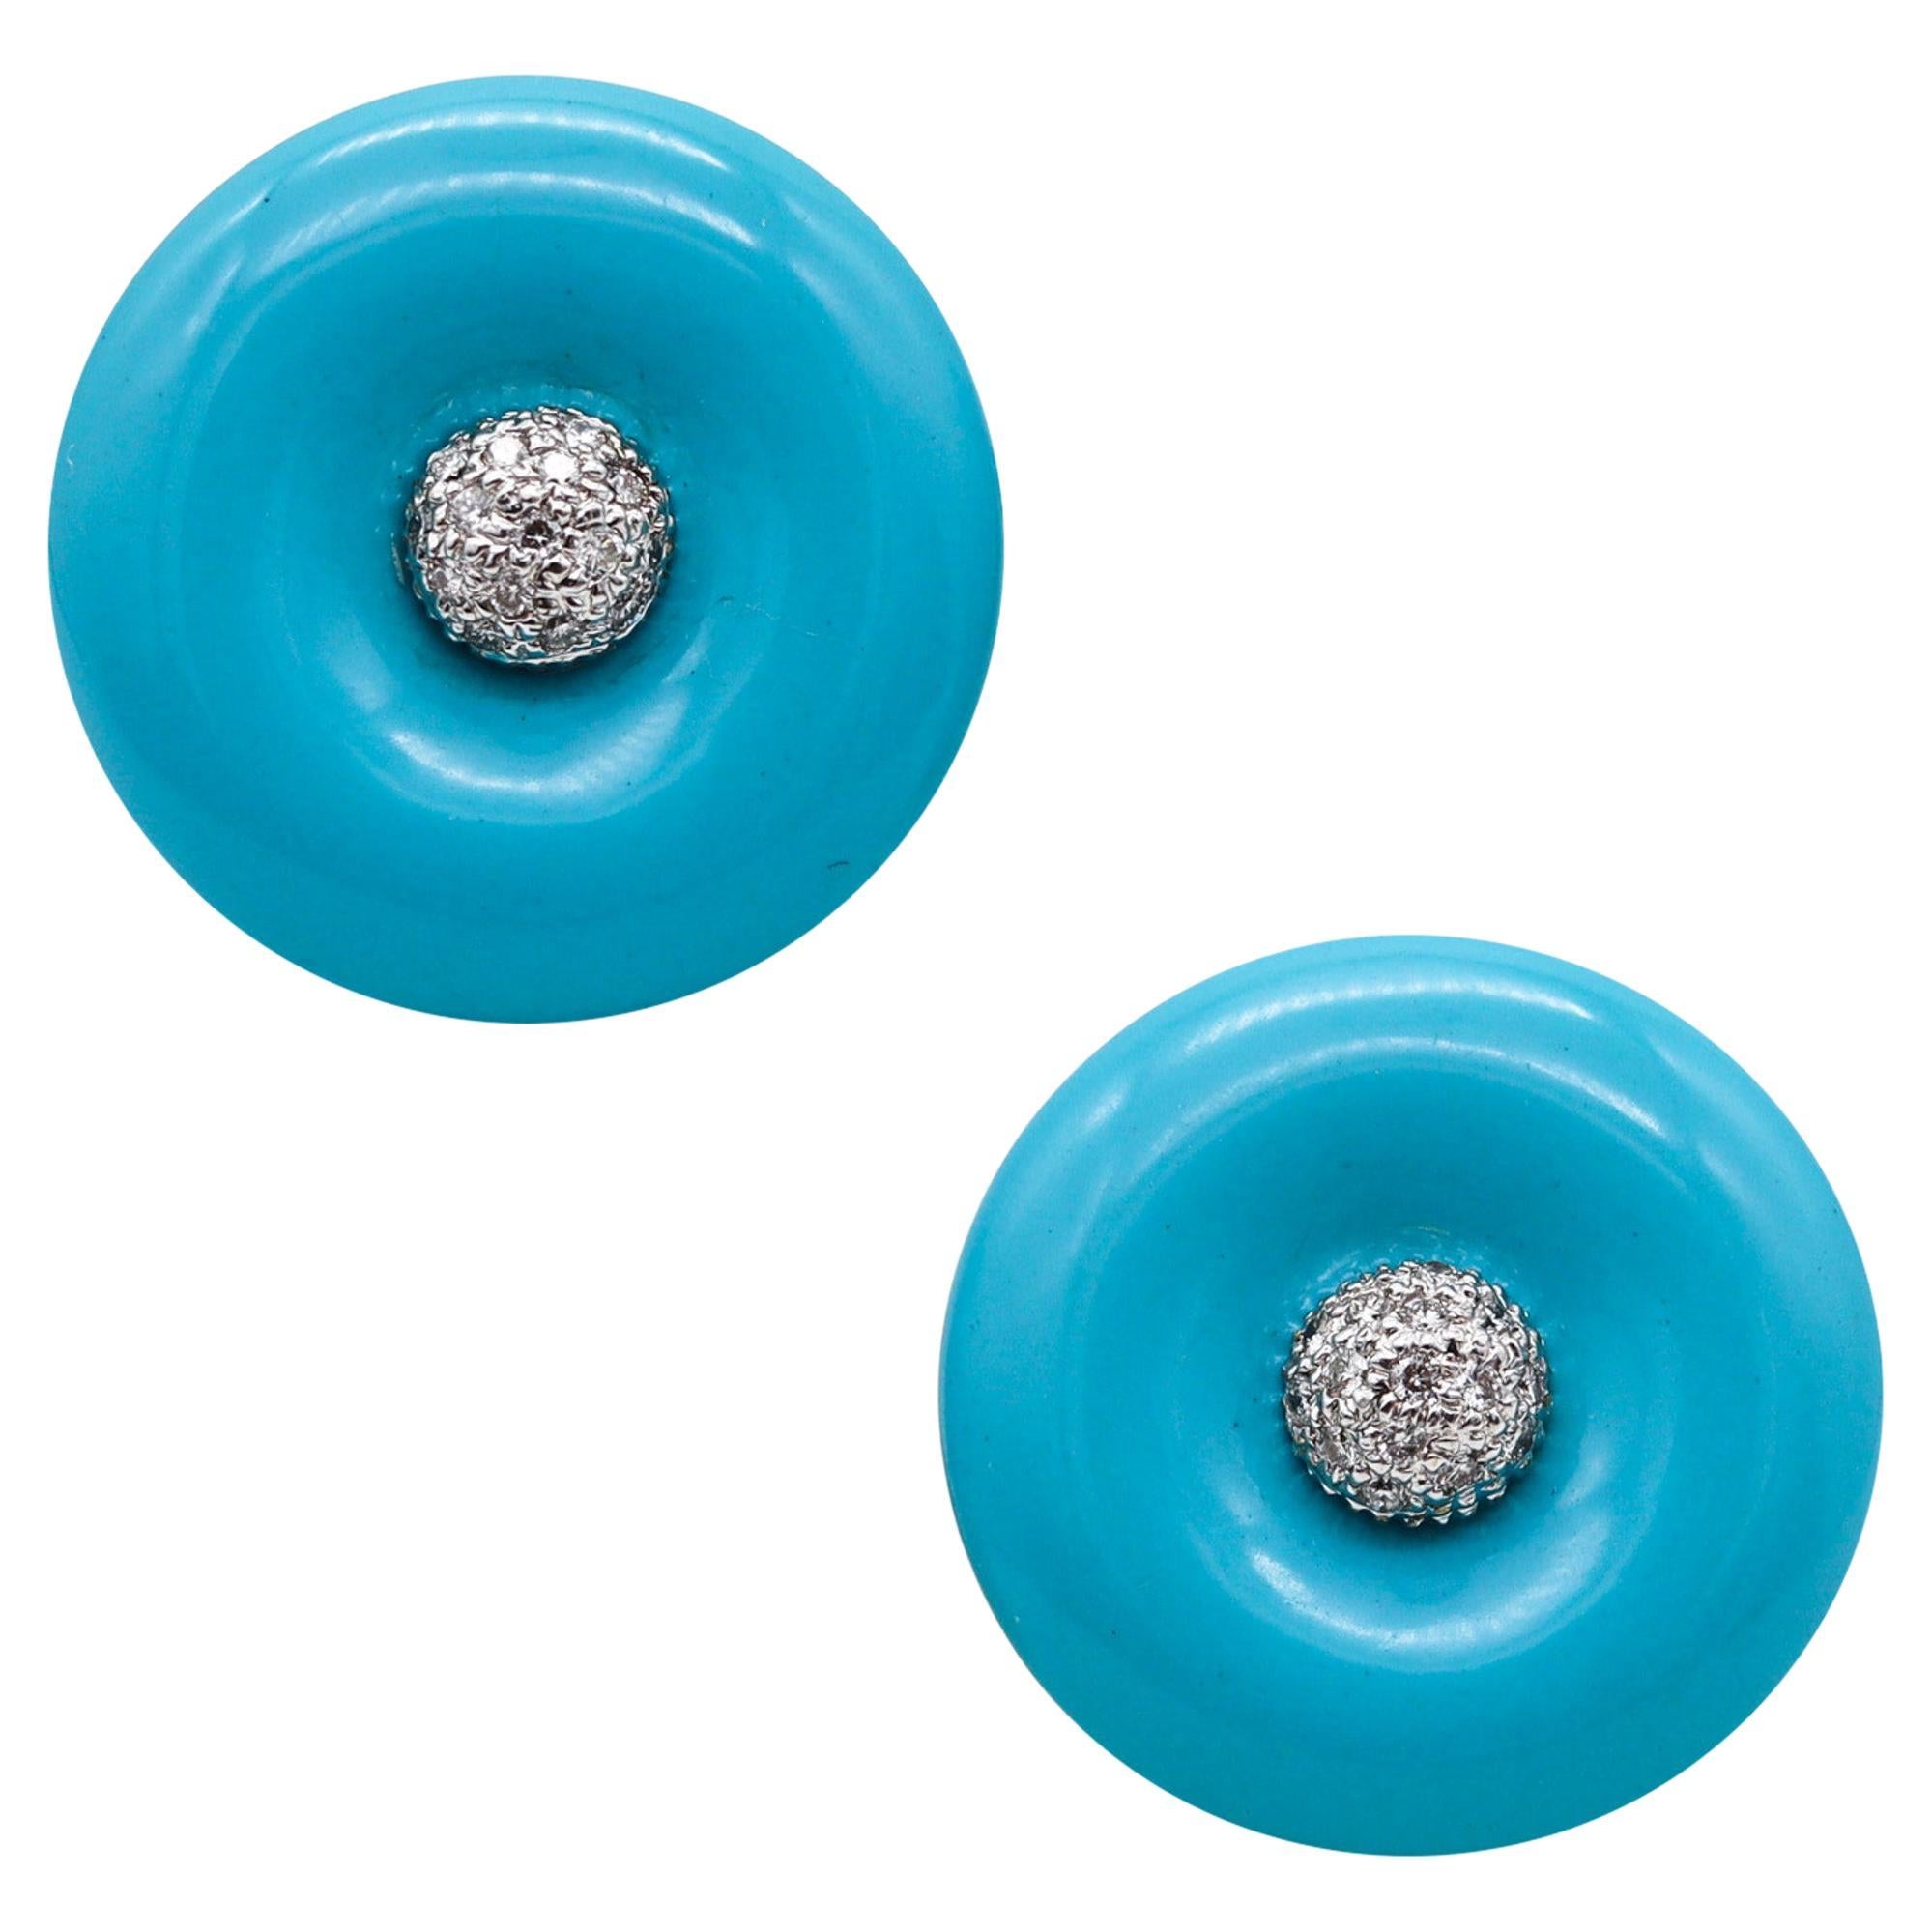 Modernist Round Carved Turquoise Earrings In 18Kt White Gold With VS Diamonds For Sale